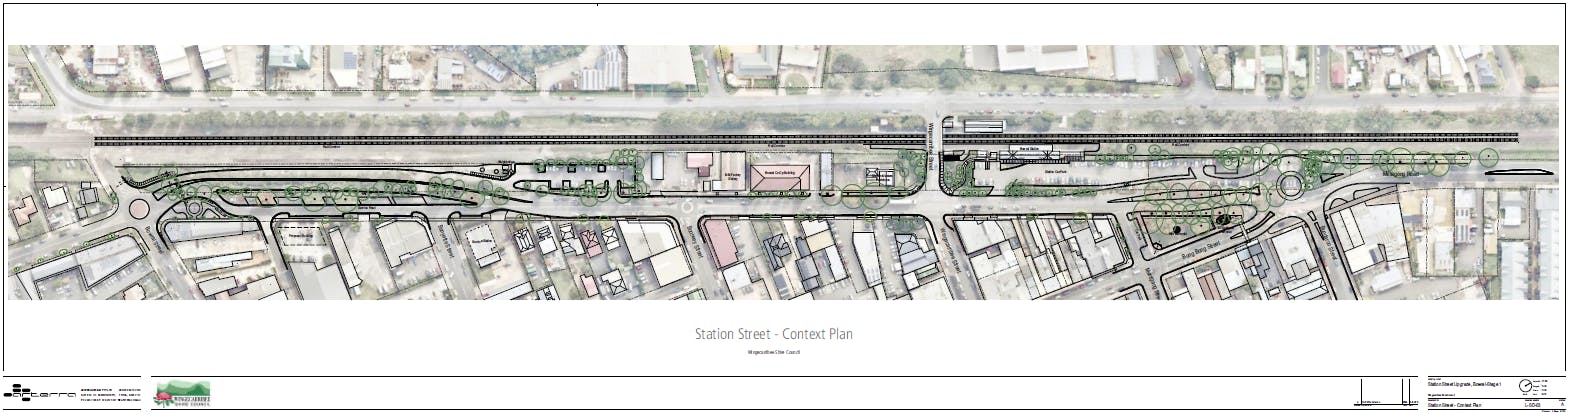 L-SD-03 Station Street - Context Plan_PNG.PNG